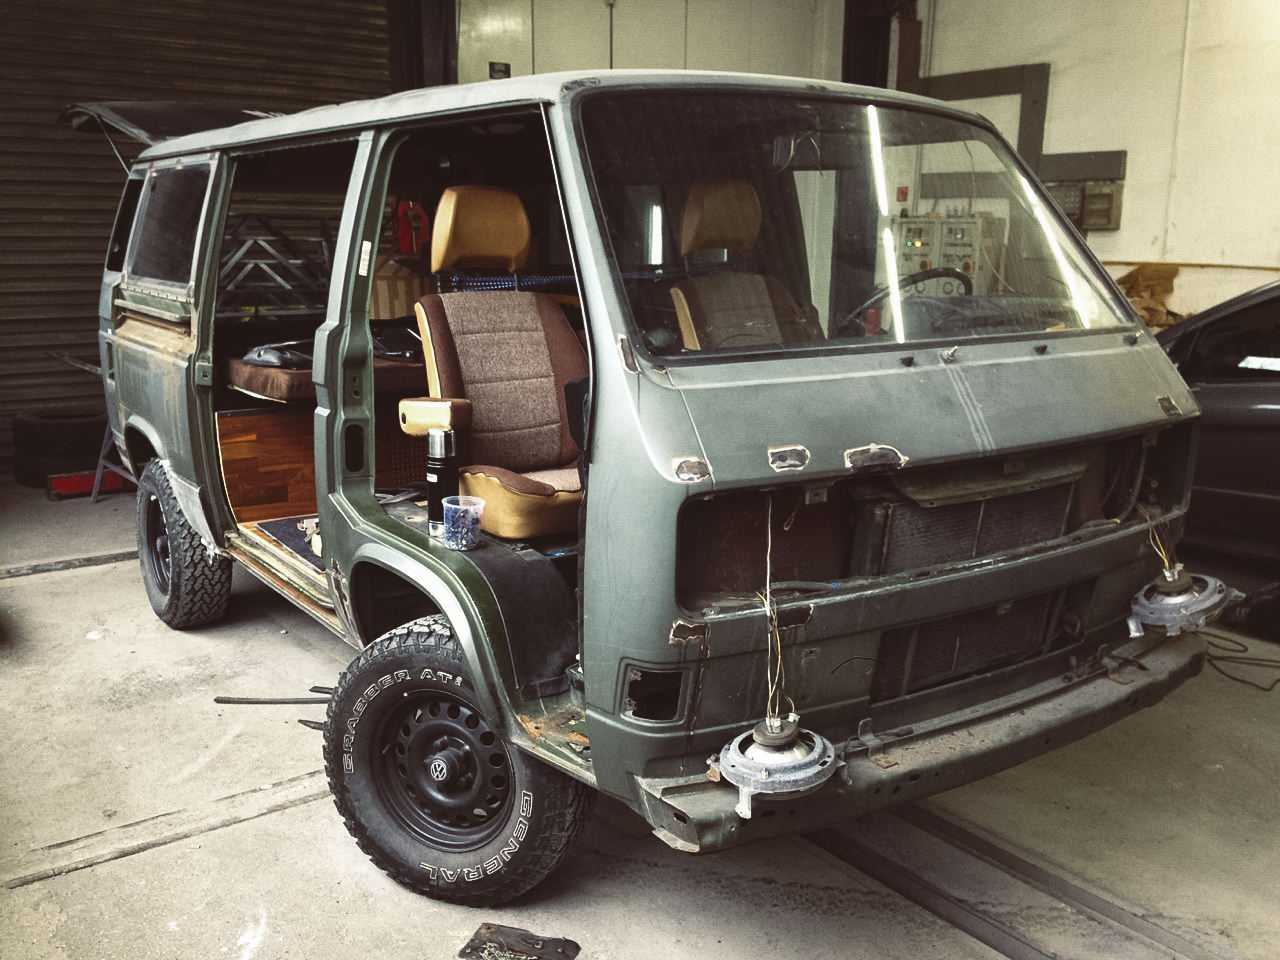 The Syncronicles – Van Life of Rob J and his VW T3